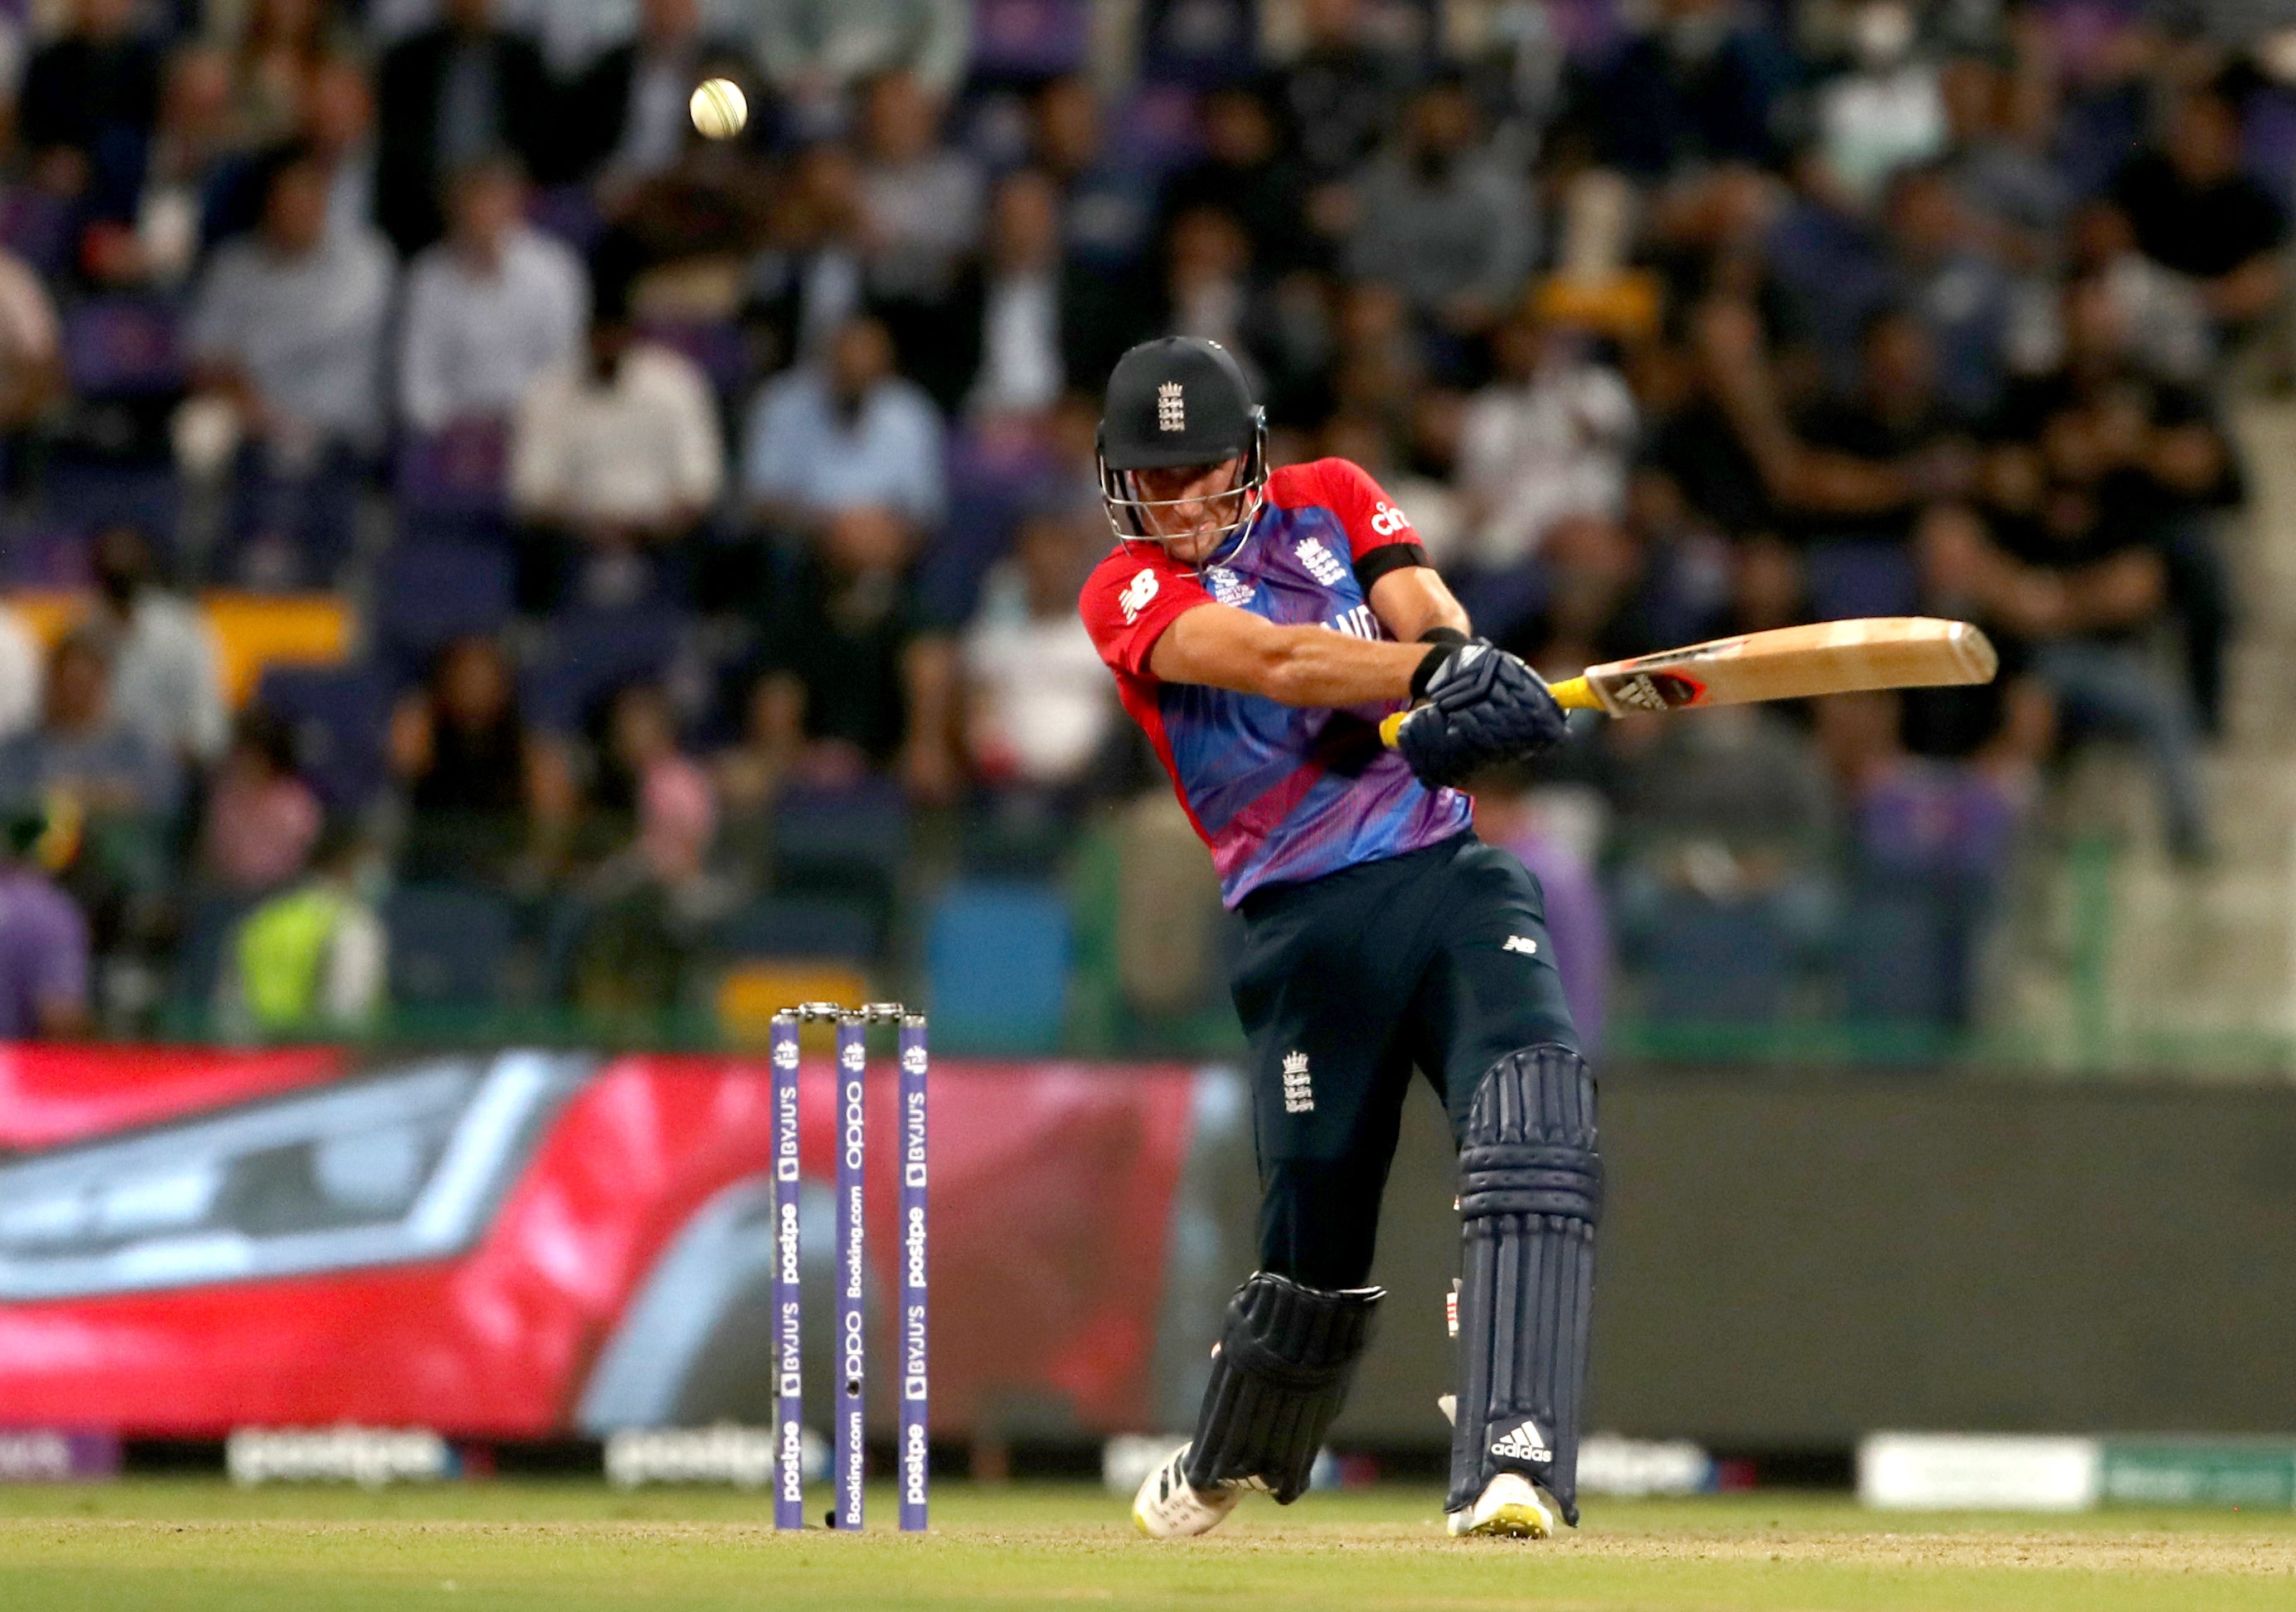 Livingstone was a key member of England’s T20 World Cup squad